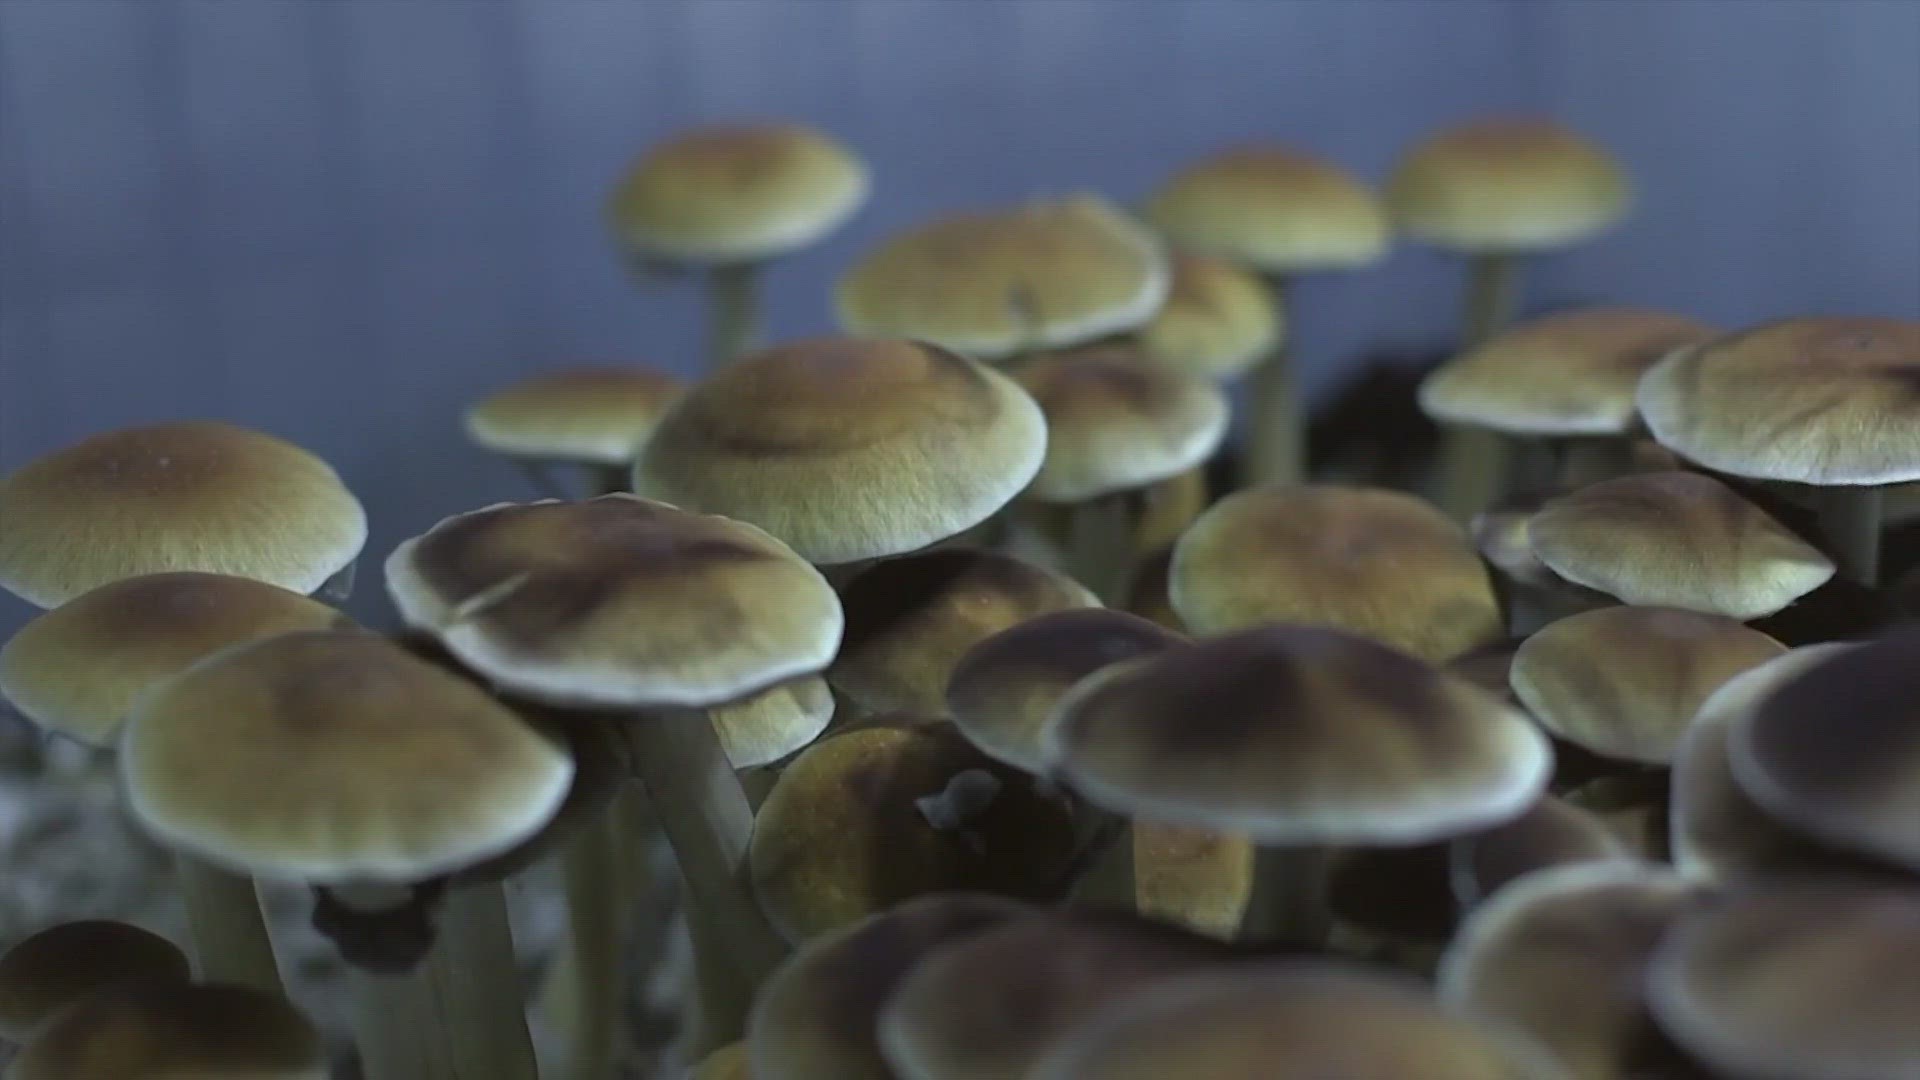 Researchers at Ohio State University have just been approved to start growing the mushrooms.